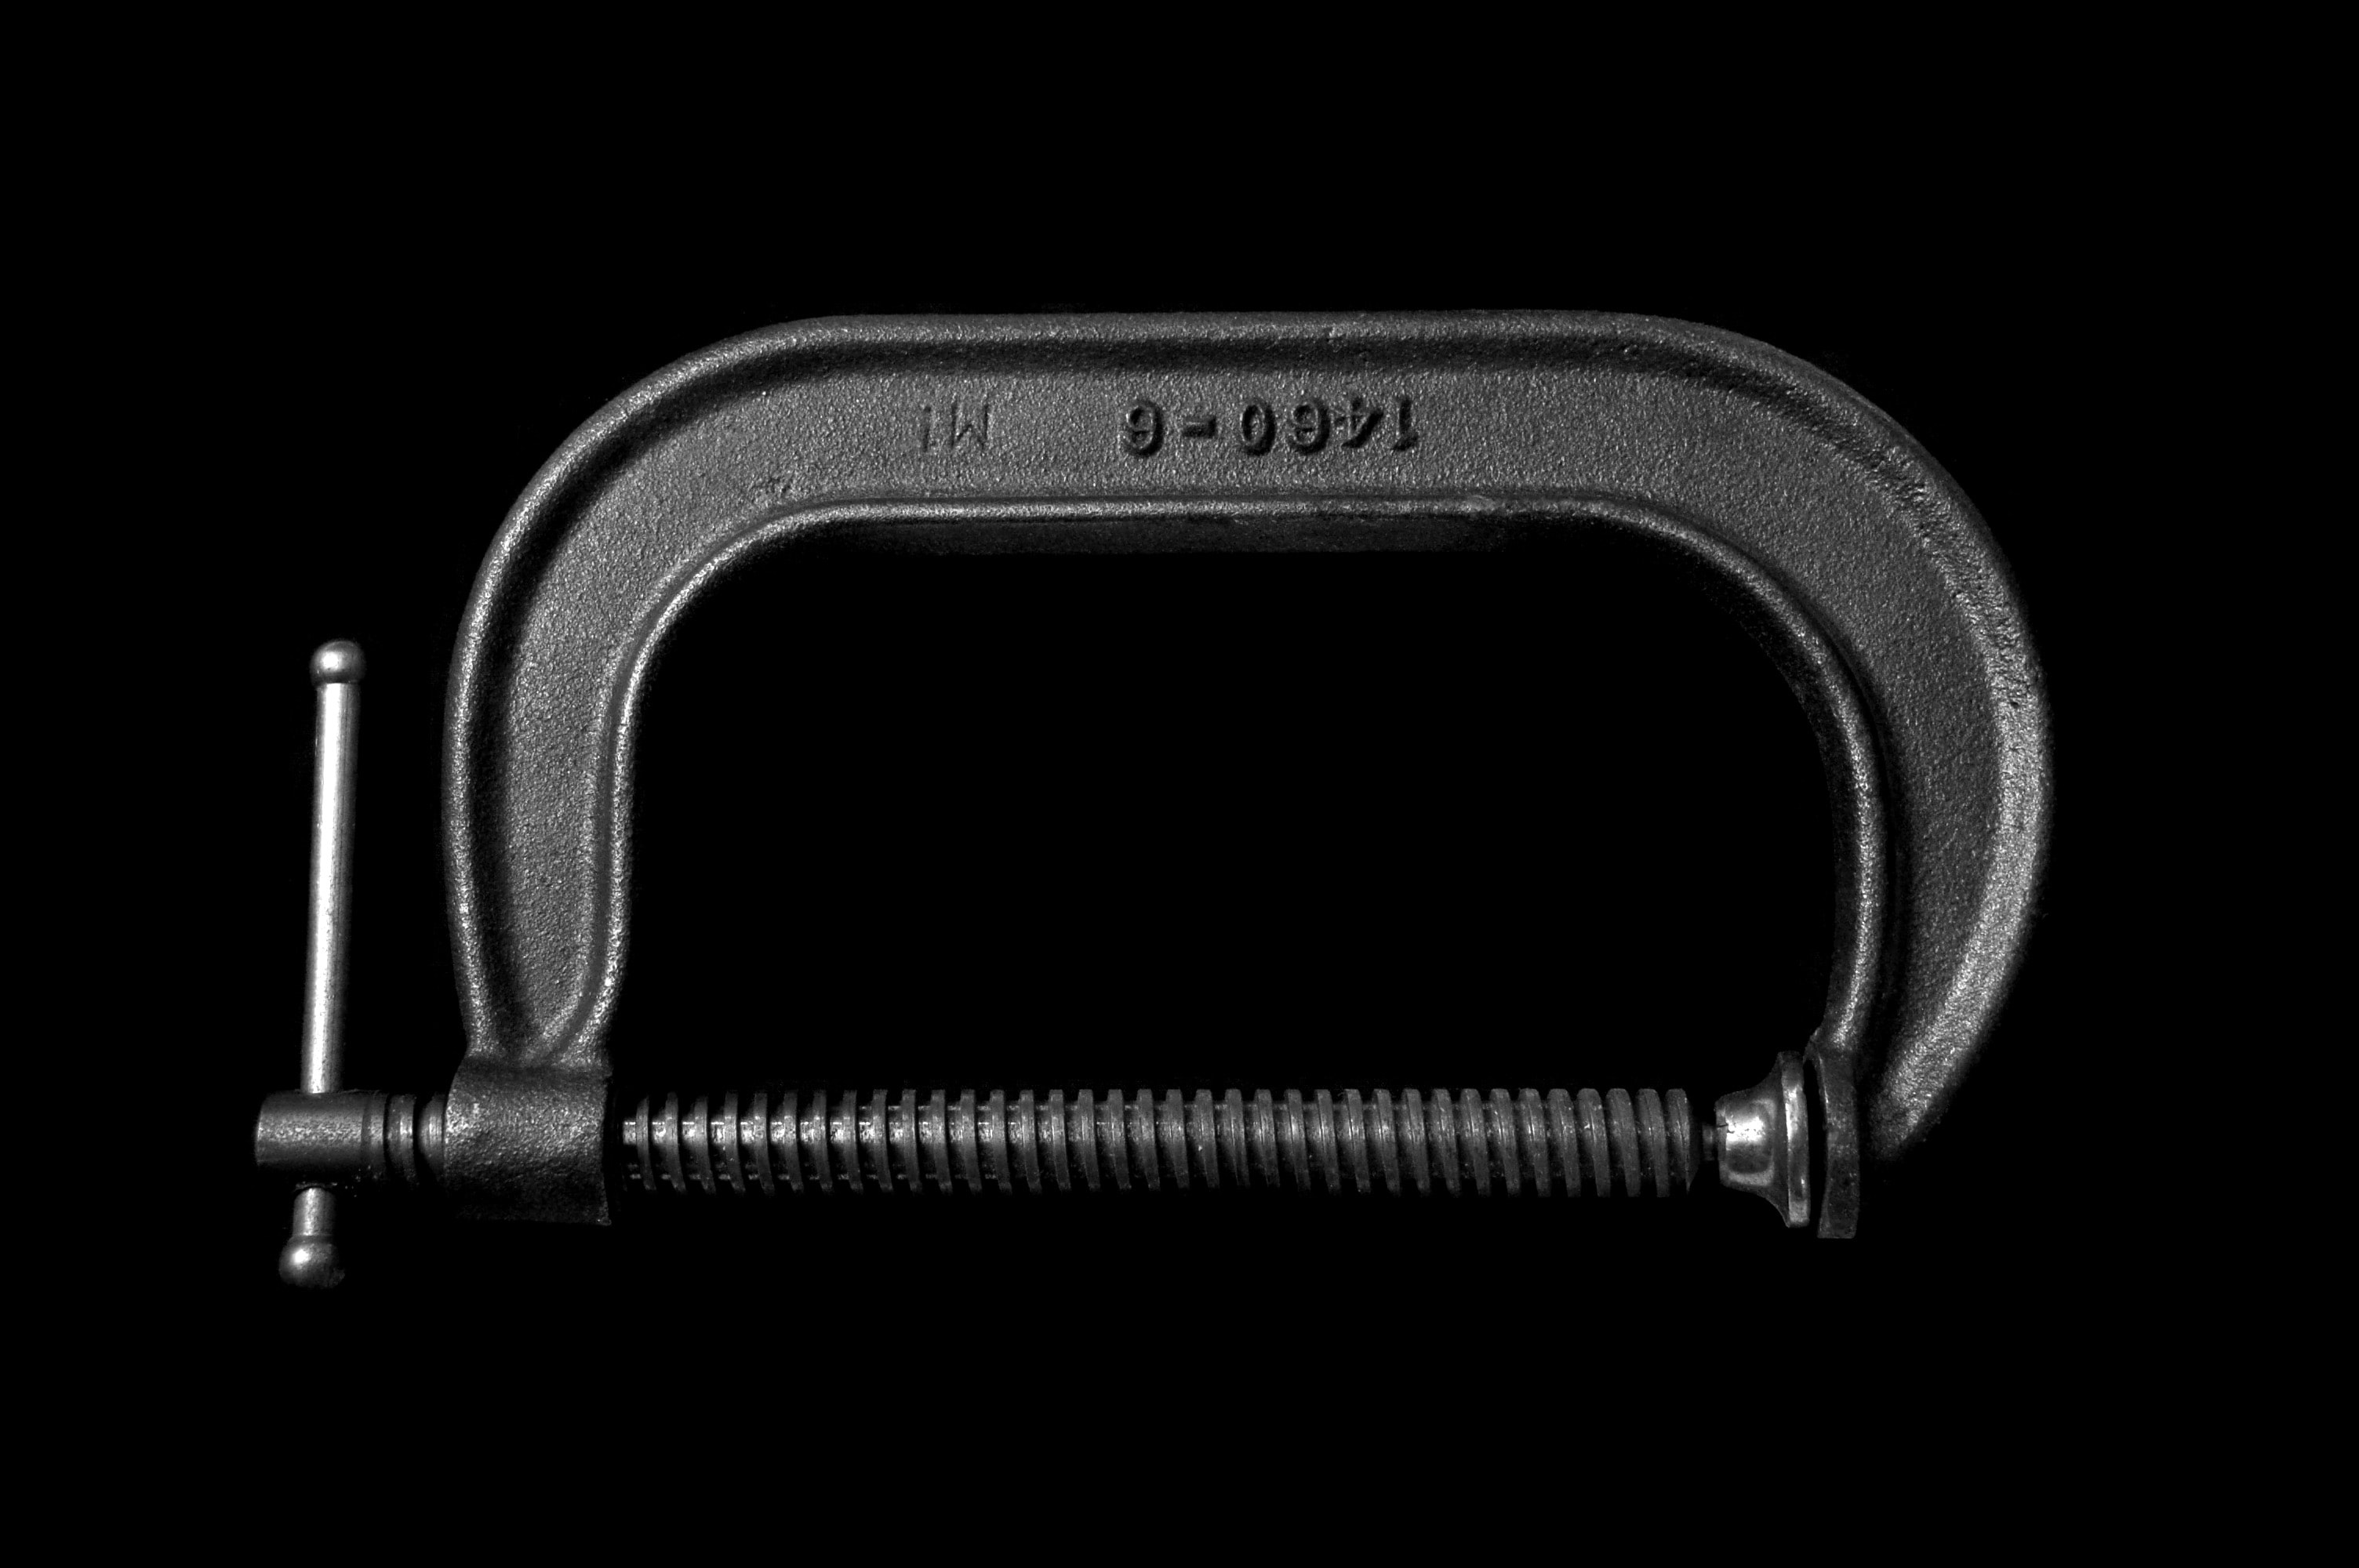 A black c-clamp on a black background